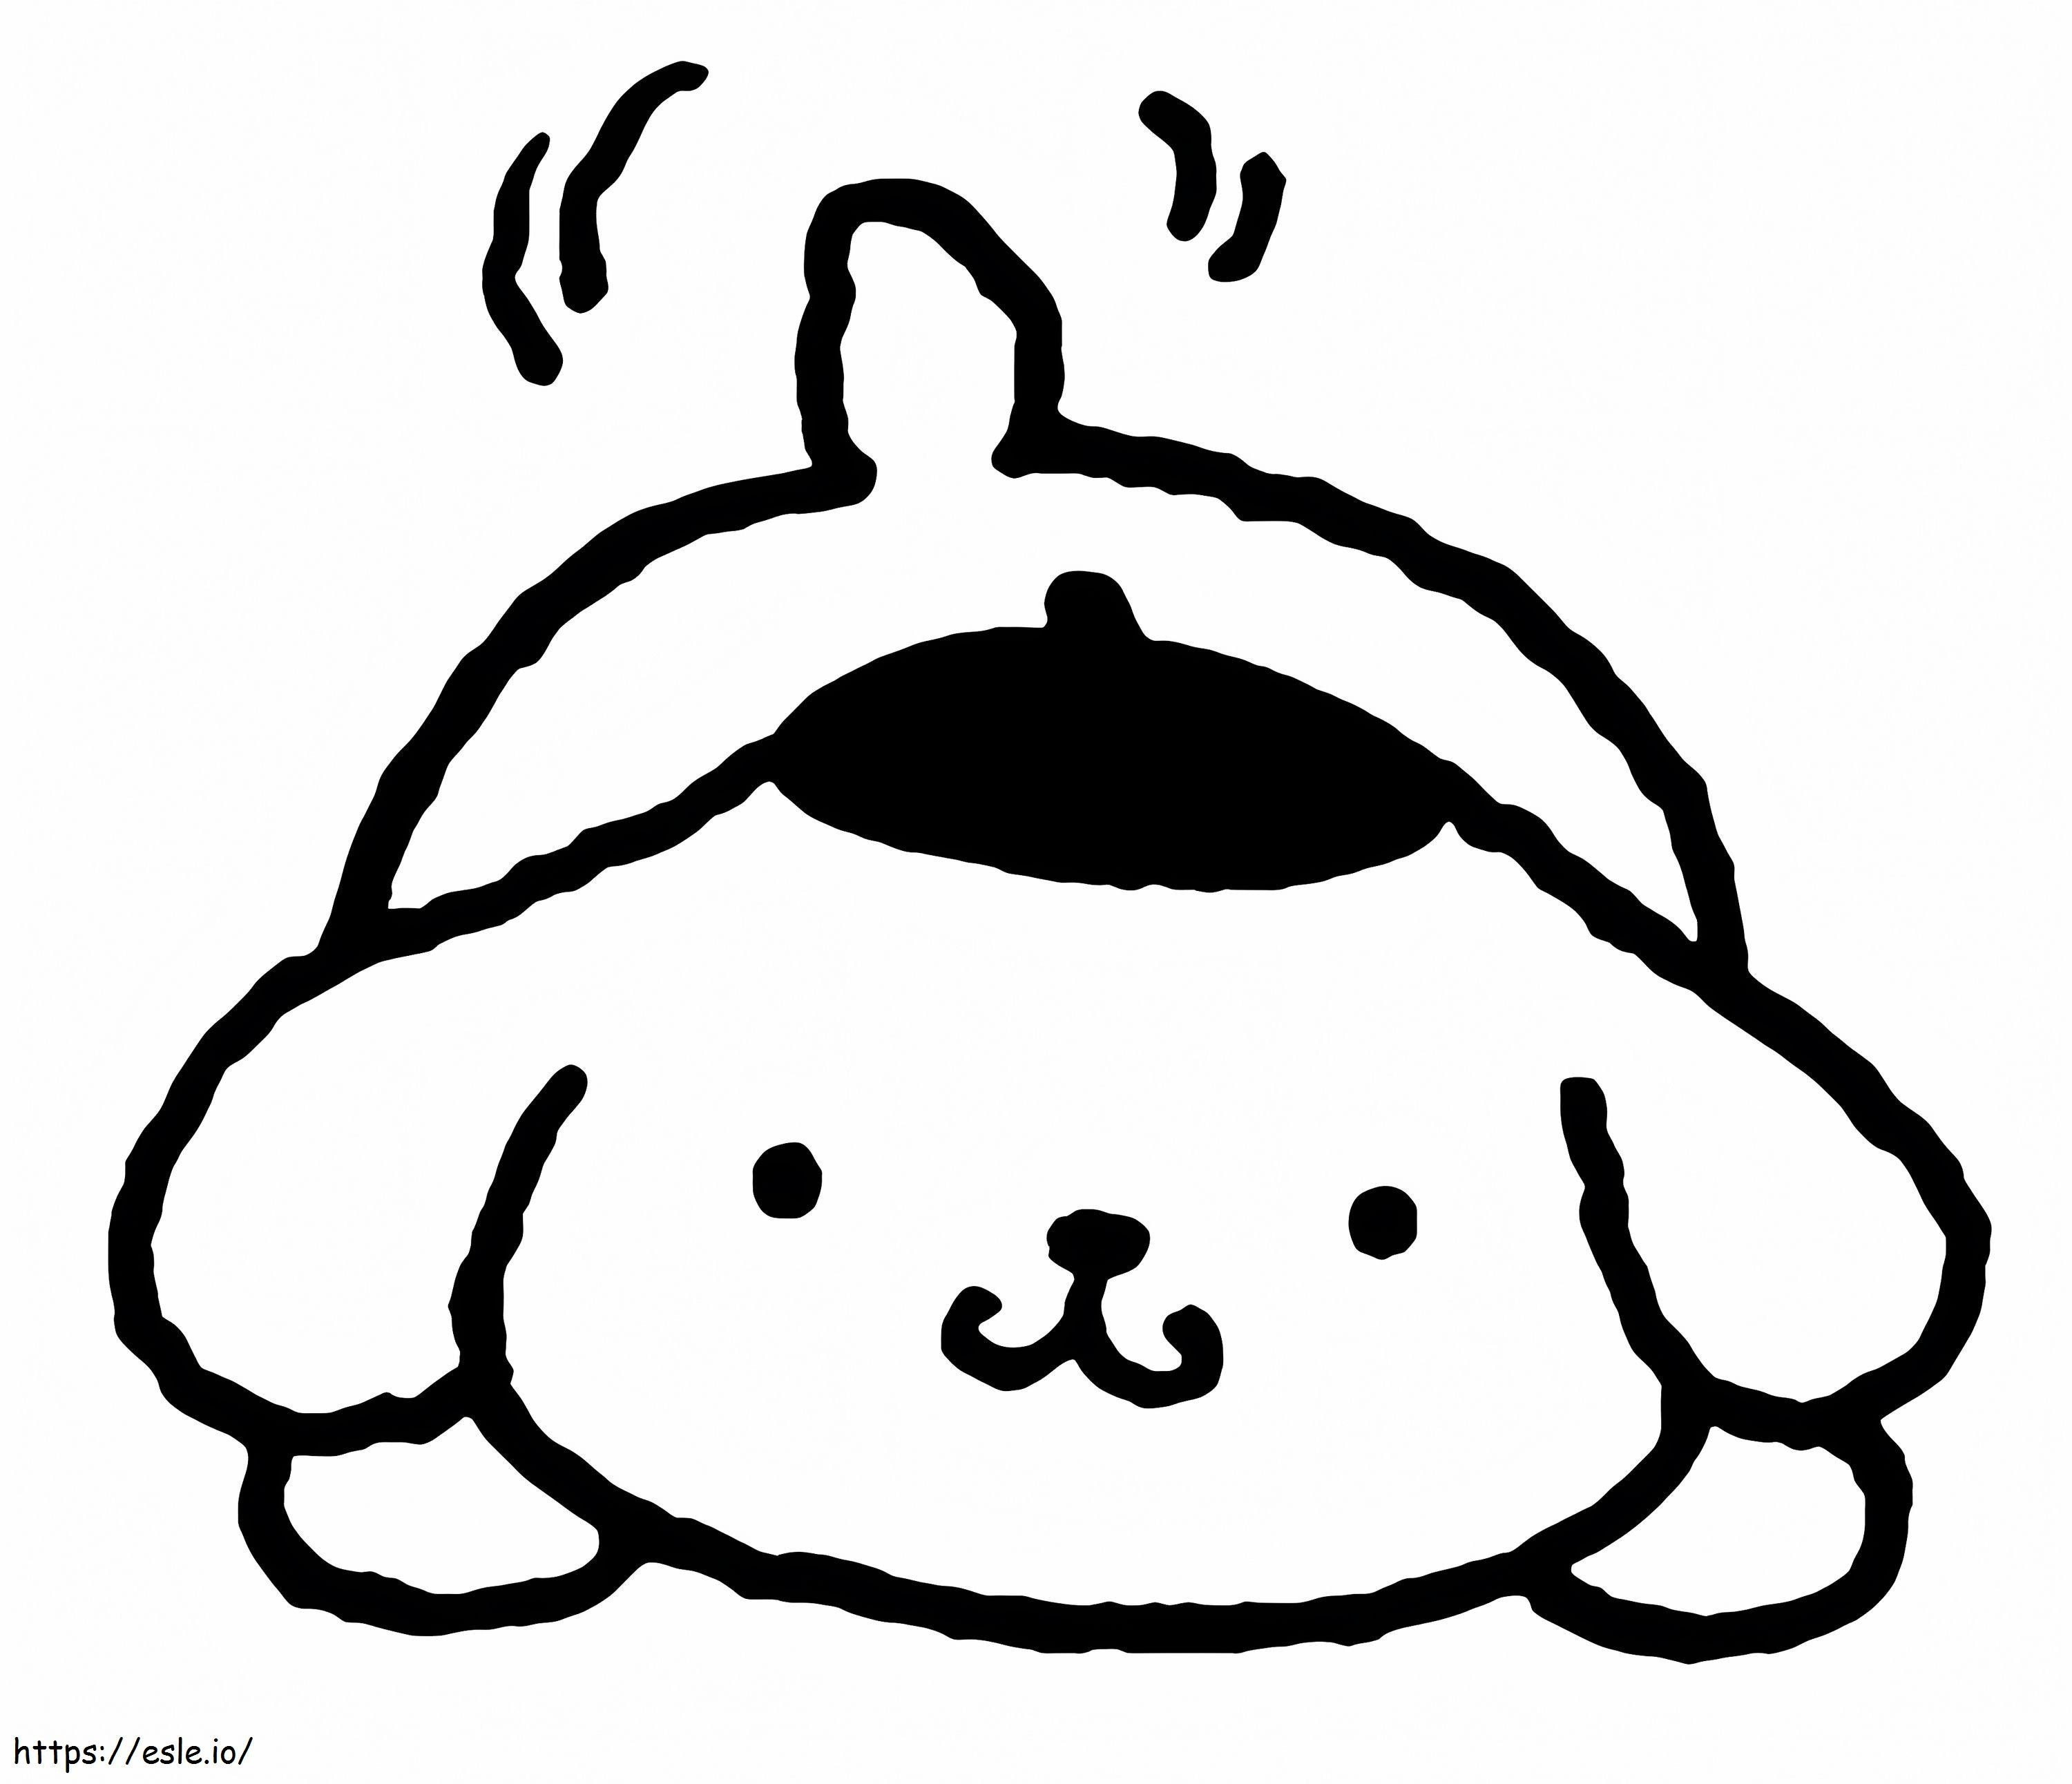 Pompompurin To Print coloring page